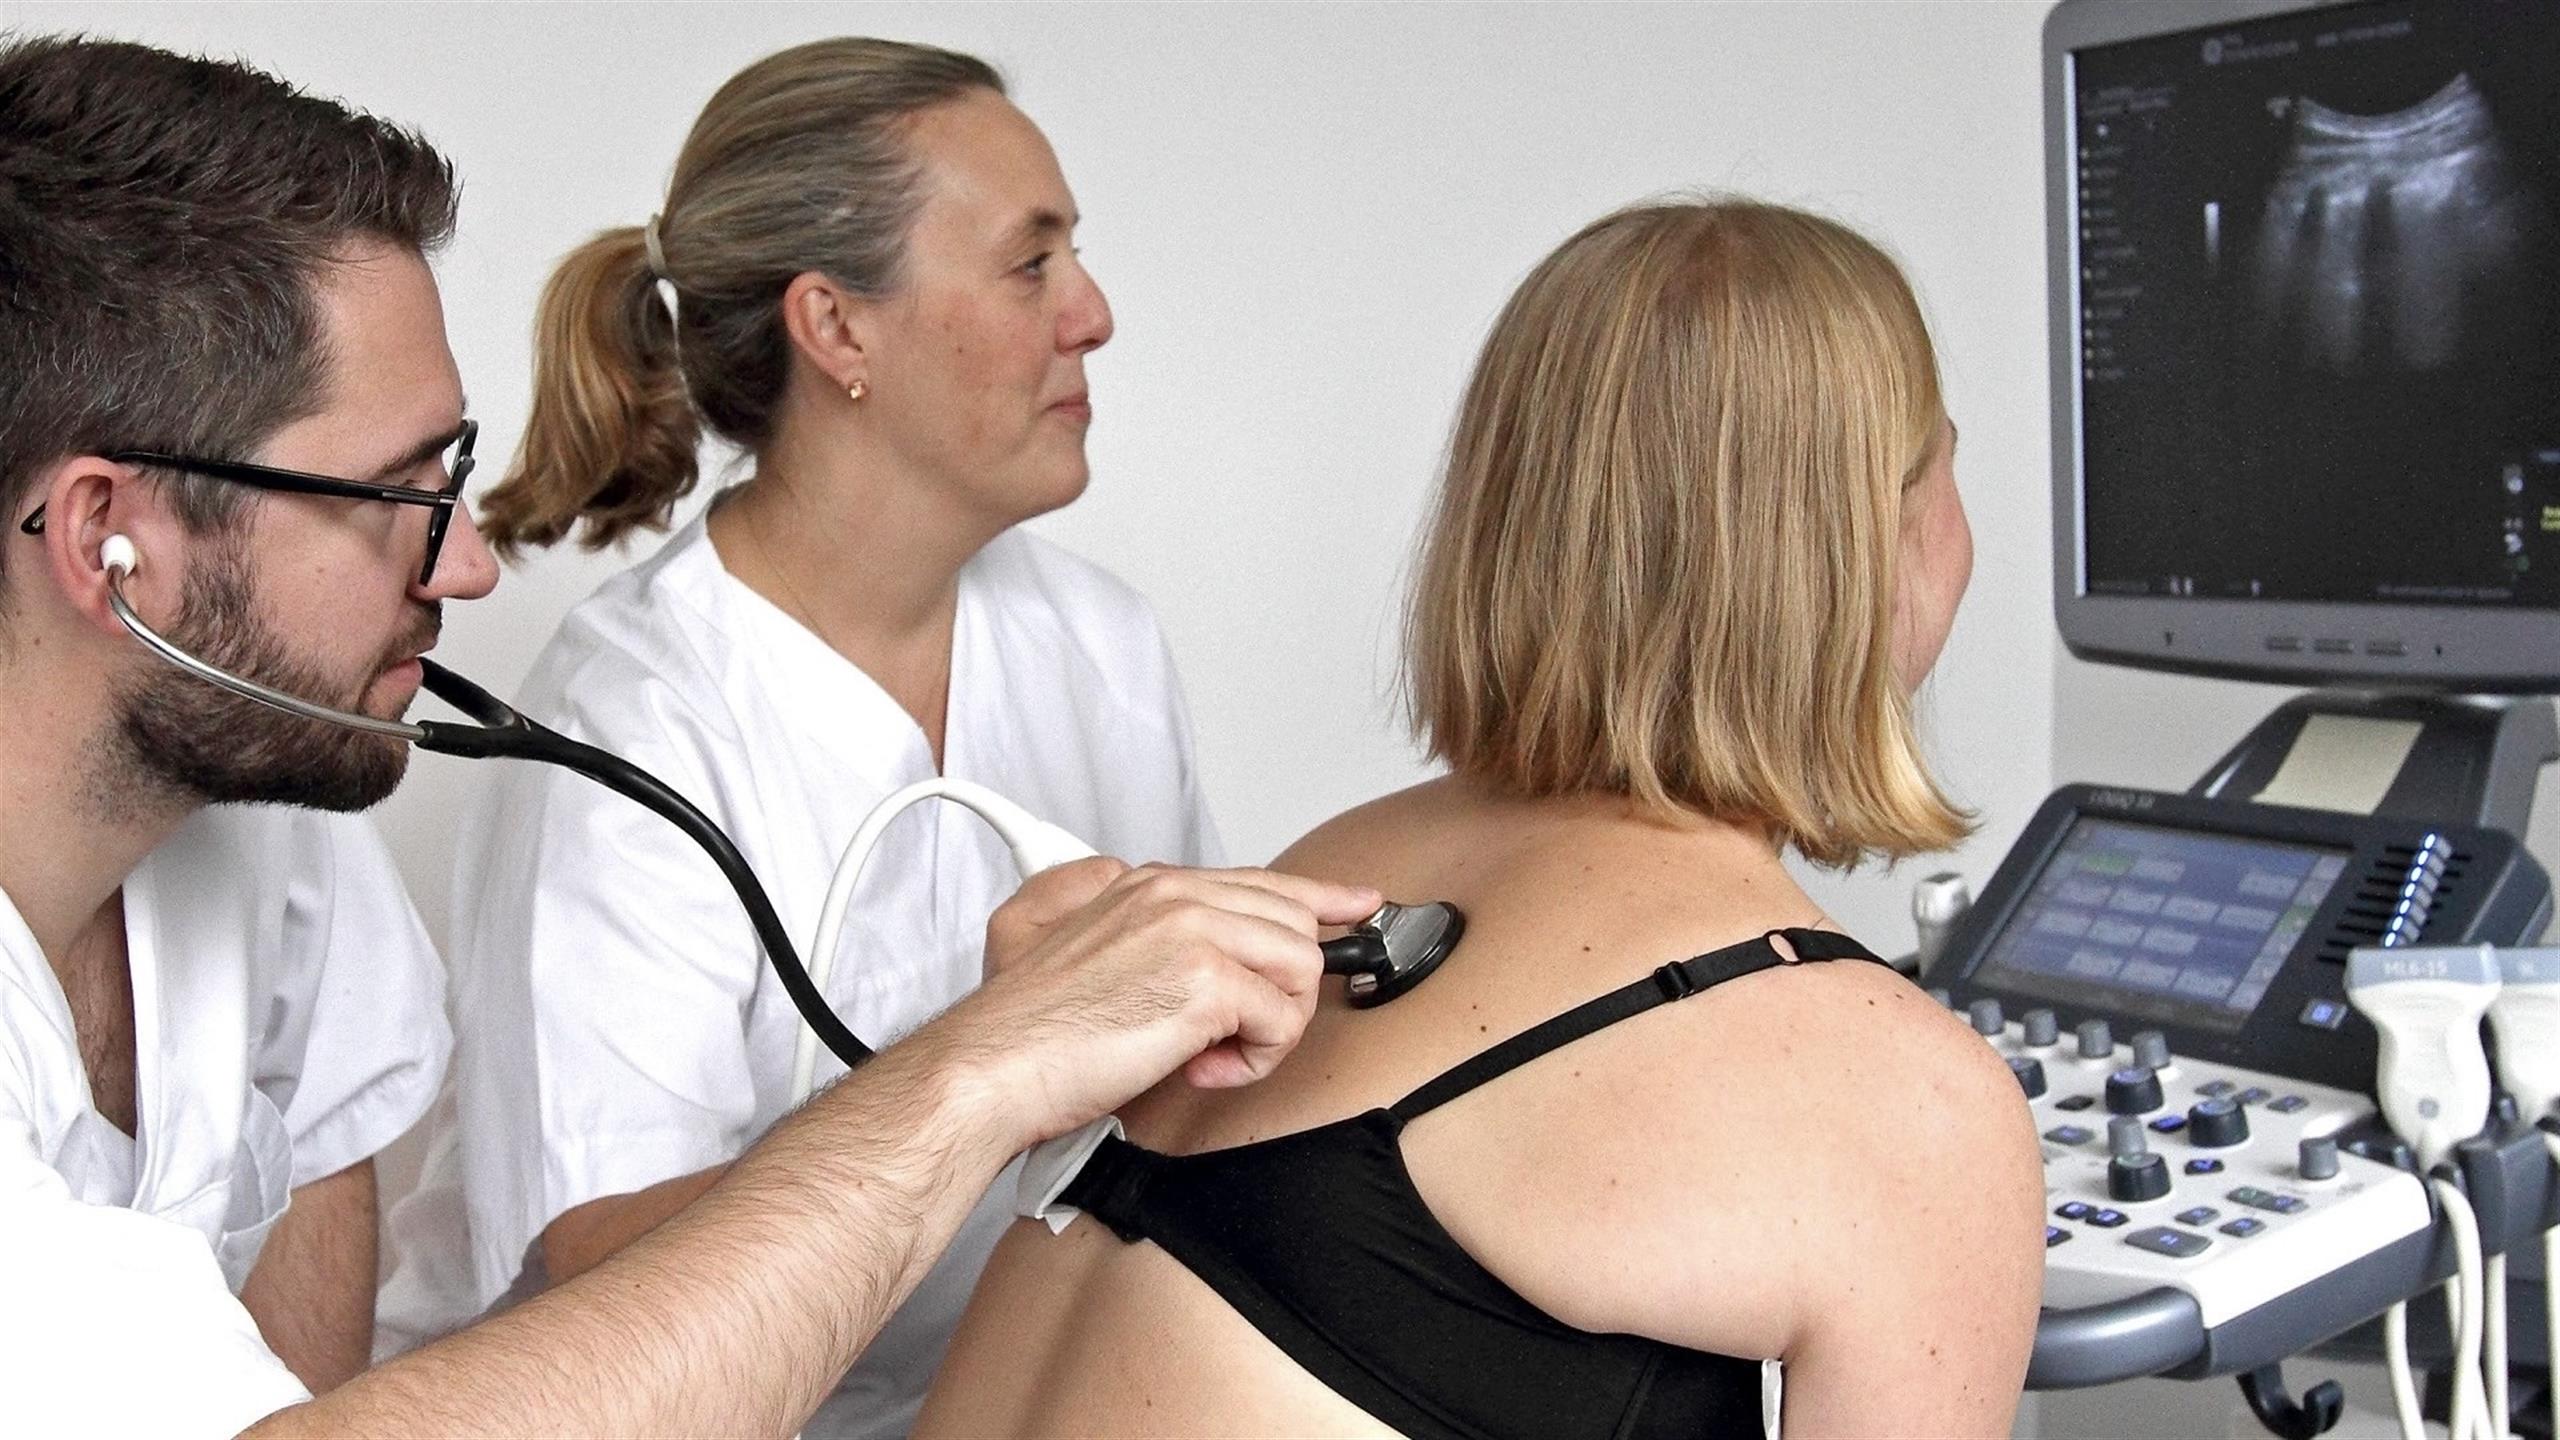 A patient for examination of her back.